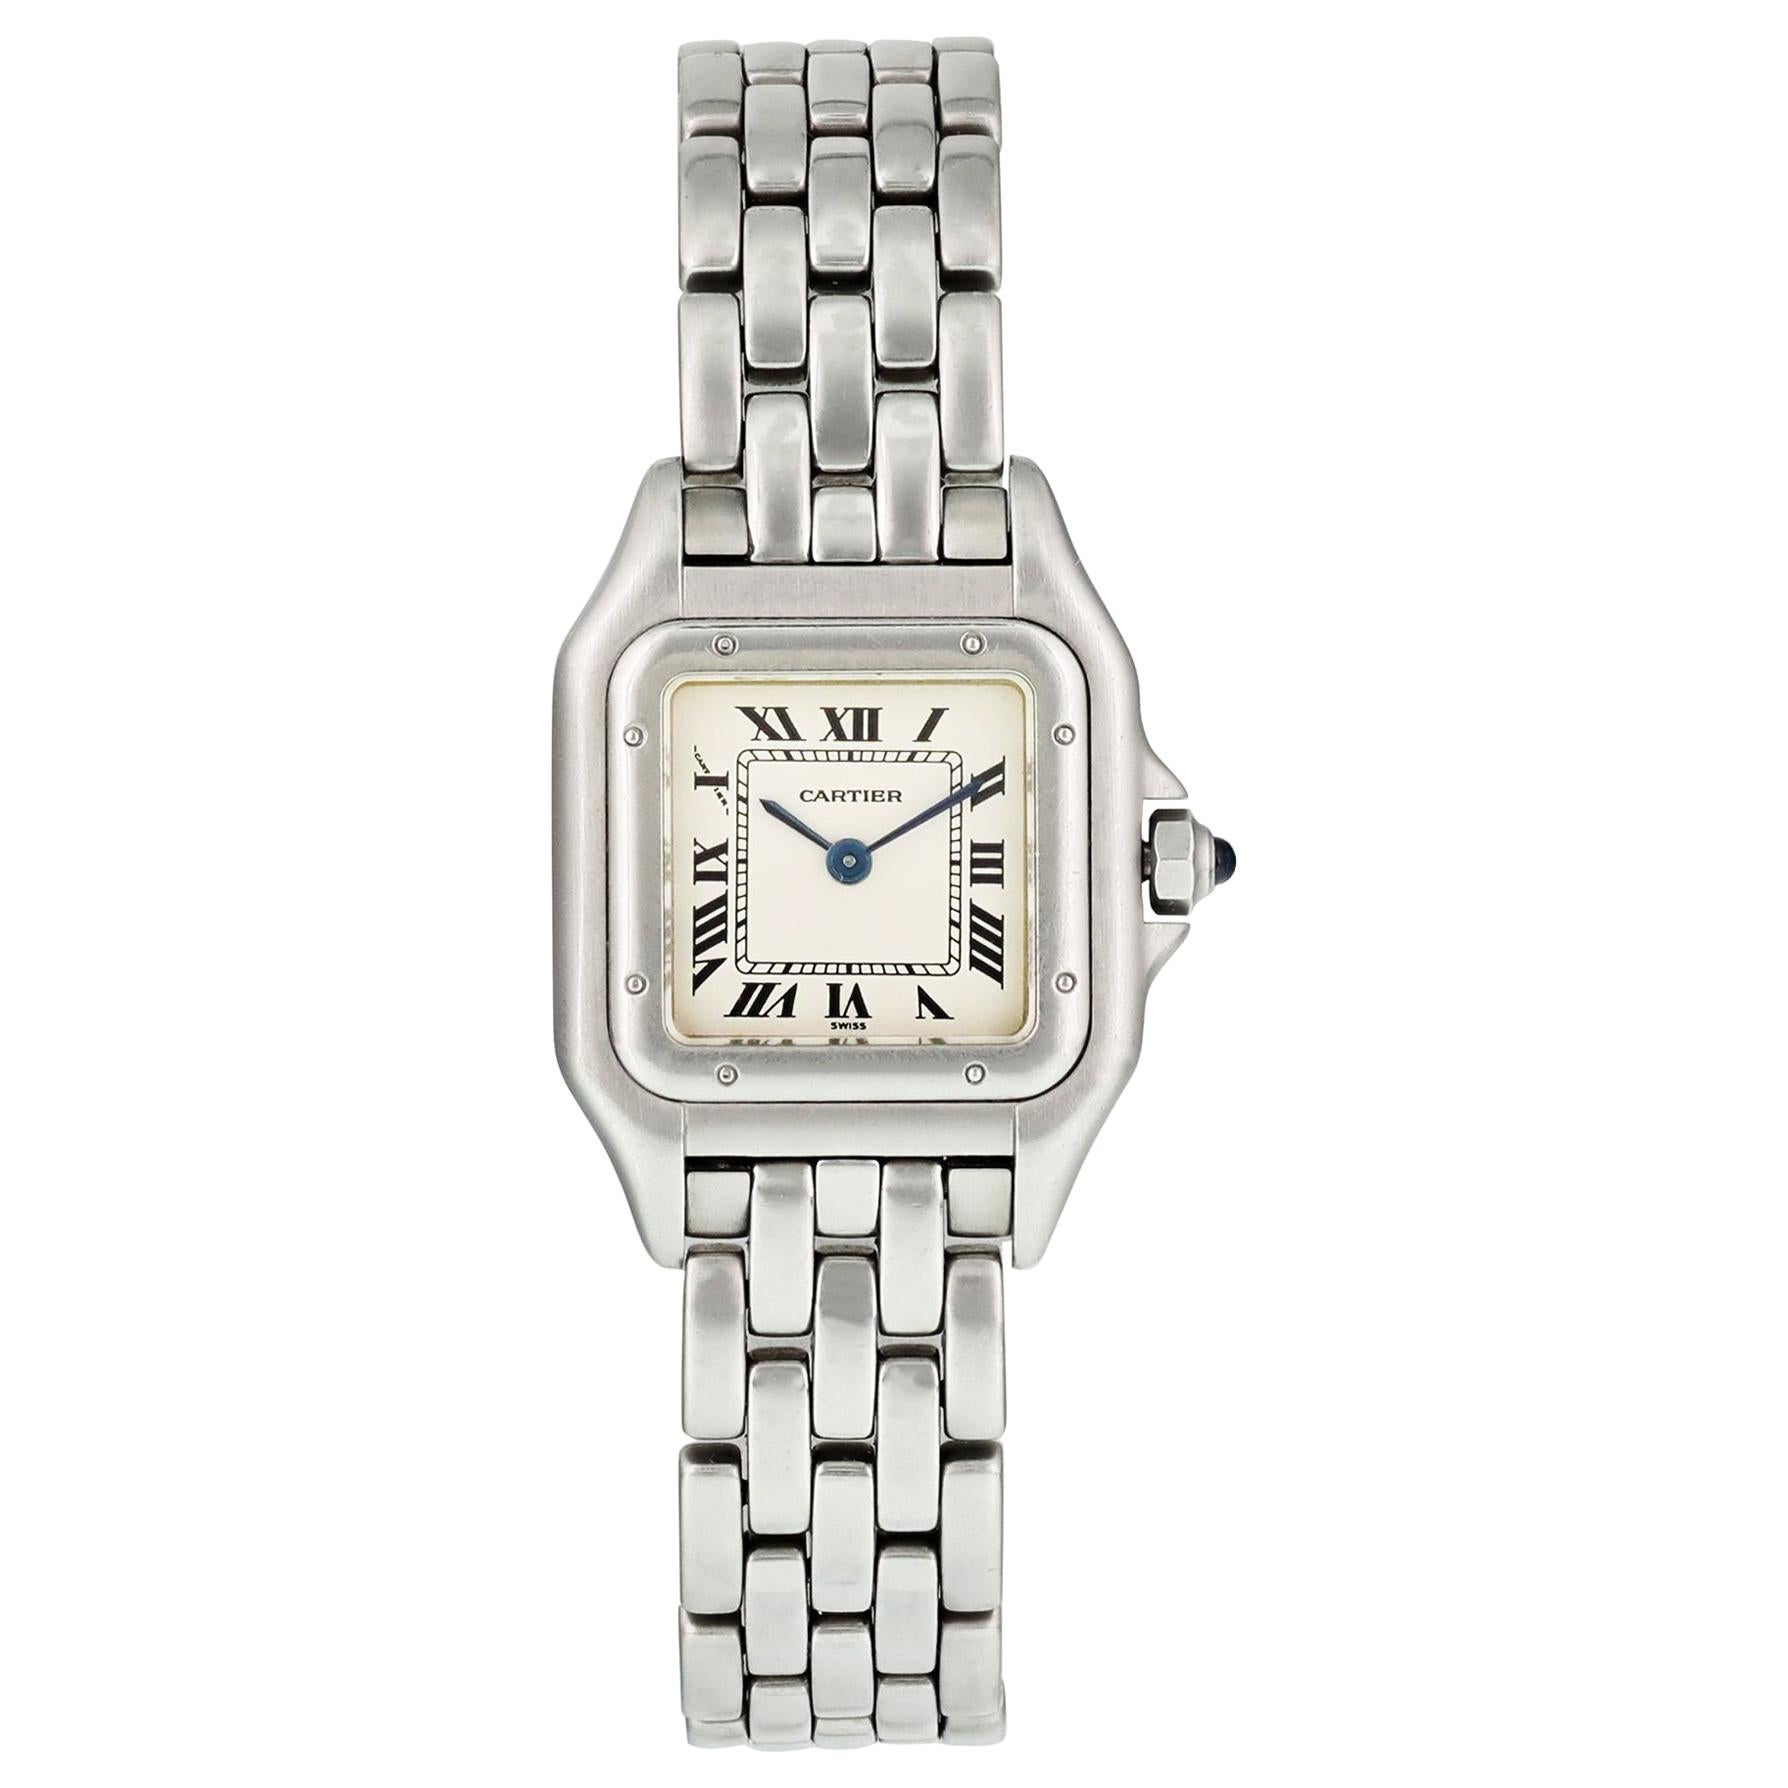 Cartier Panthere 1120 Stainless Steel Ladies Watch